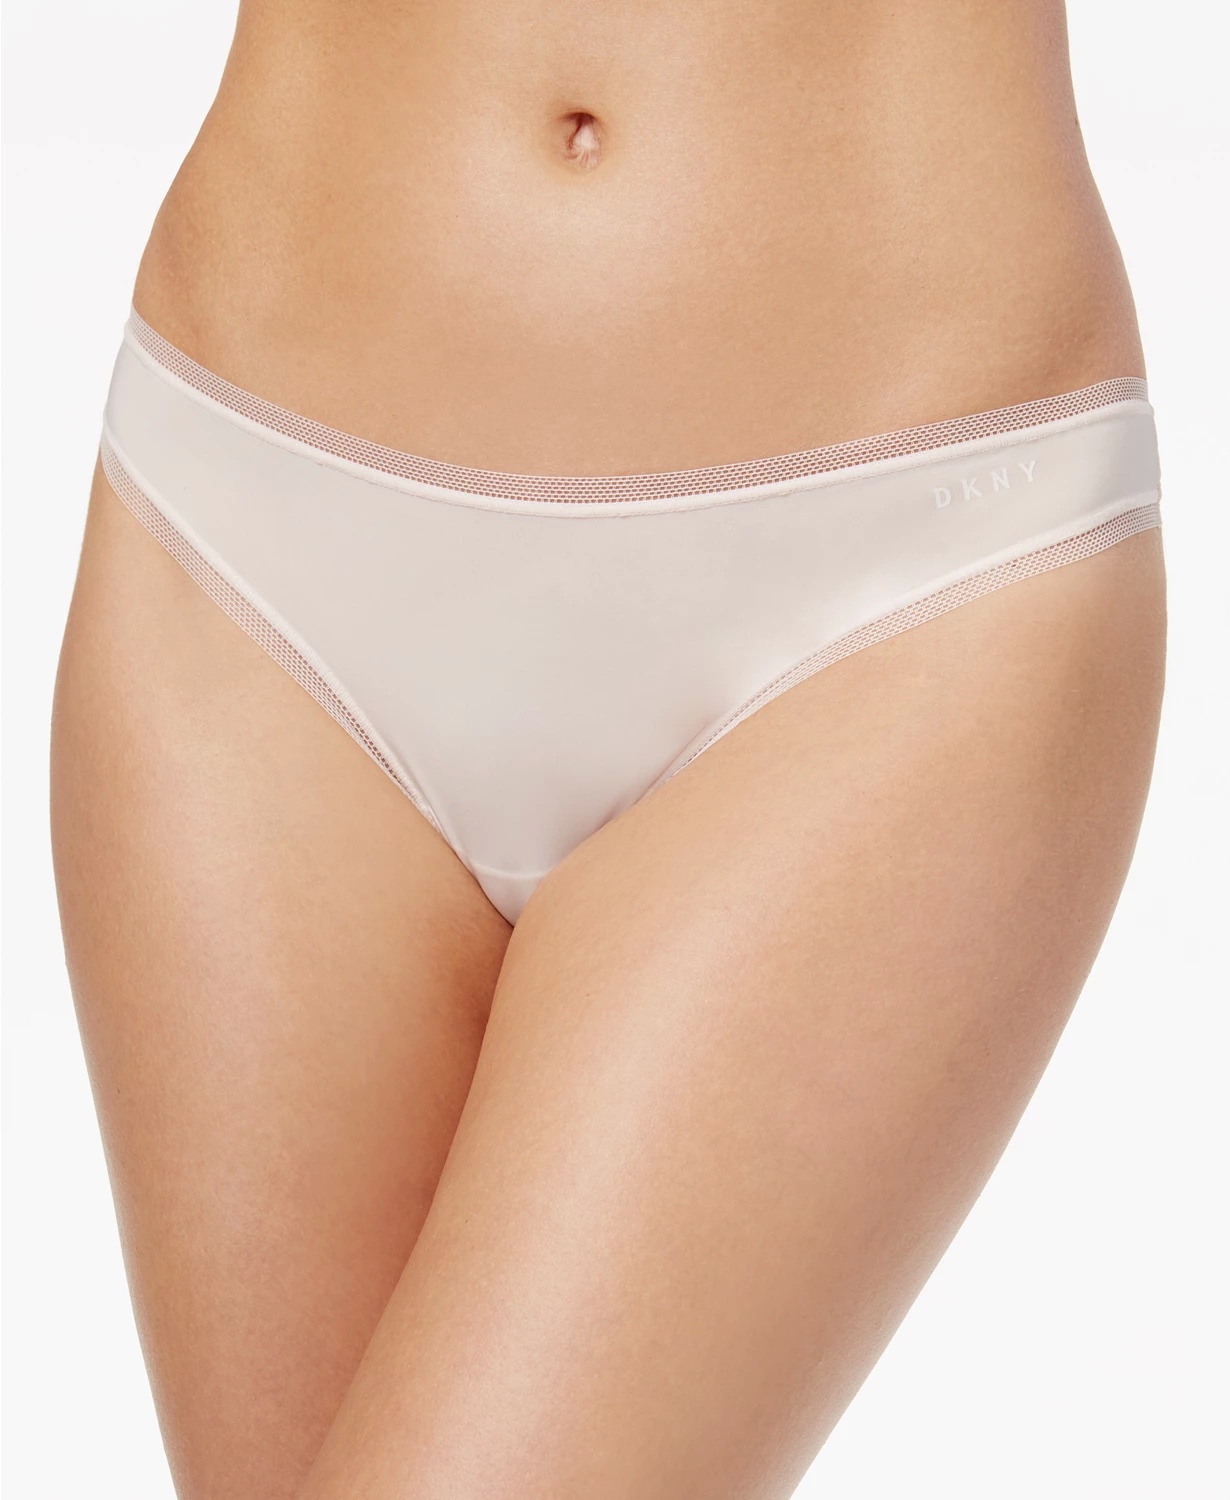 DKNY Women's Low-Rise Thong Underwear $3.95, Jenni Women's On Repeat Bike Shorts (3 colors) $3.95 & More + SD Cashback + Free Store Pickup at Macy's or FS on $25+